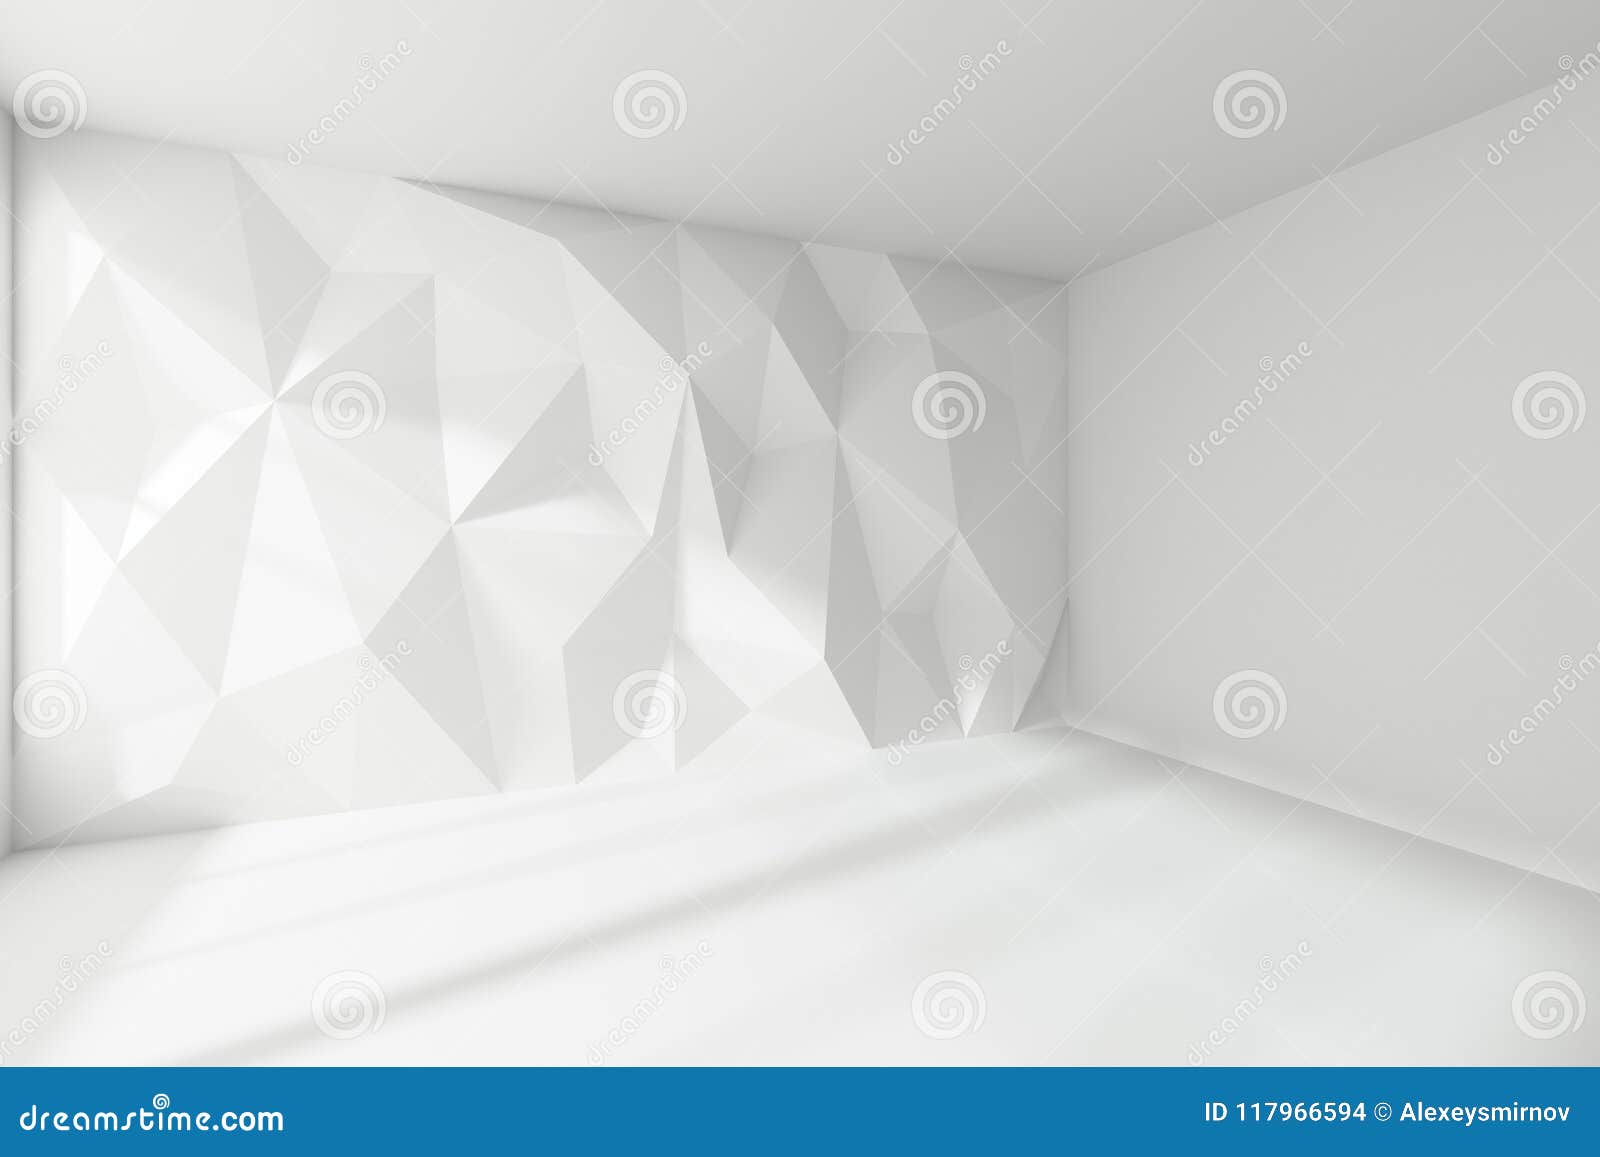 Corner Of Abstract White Room With Rumpled Wall And Light From W